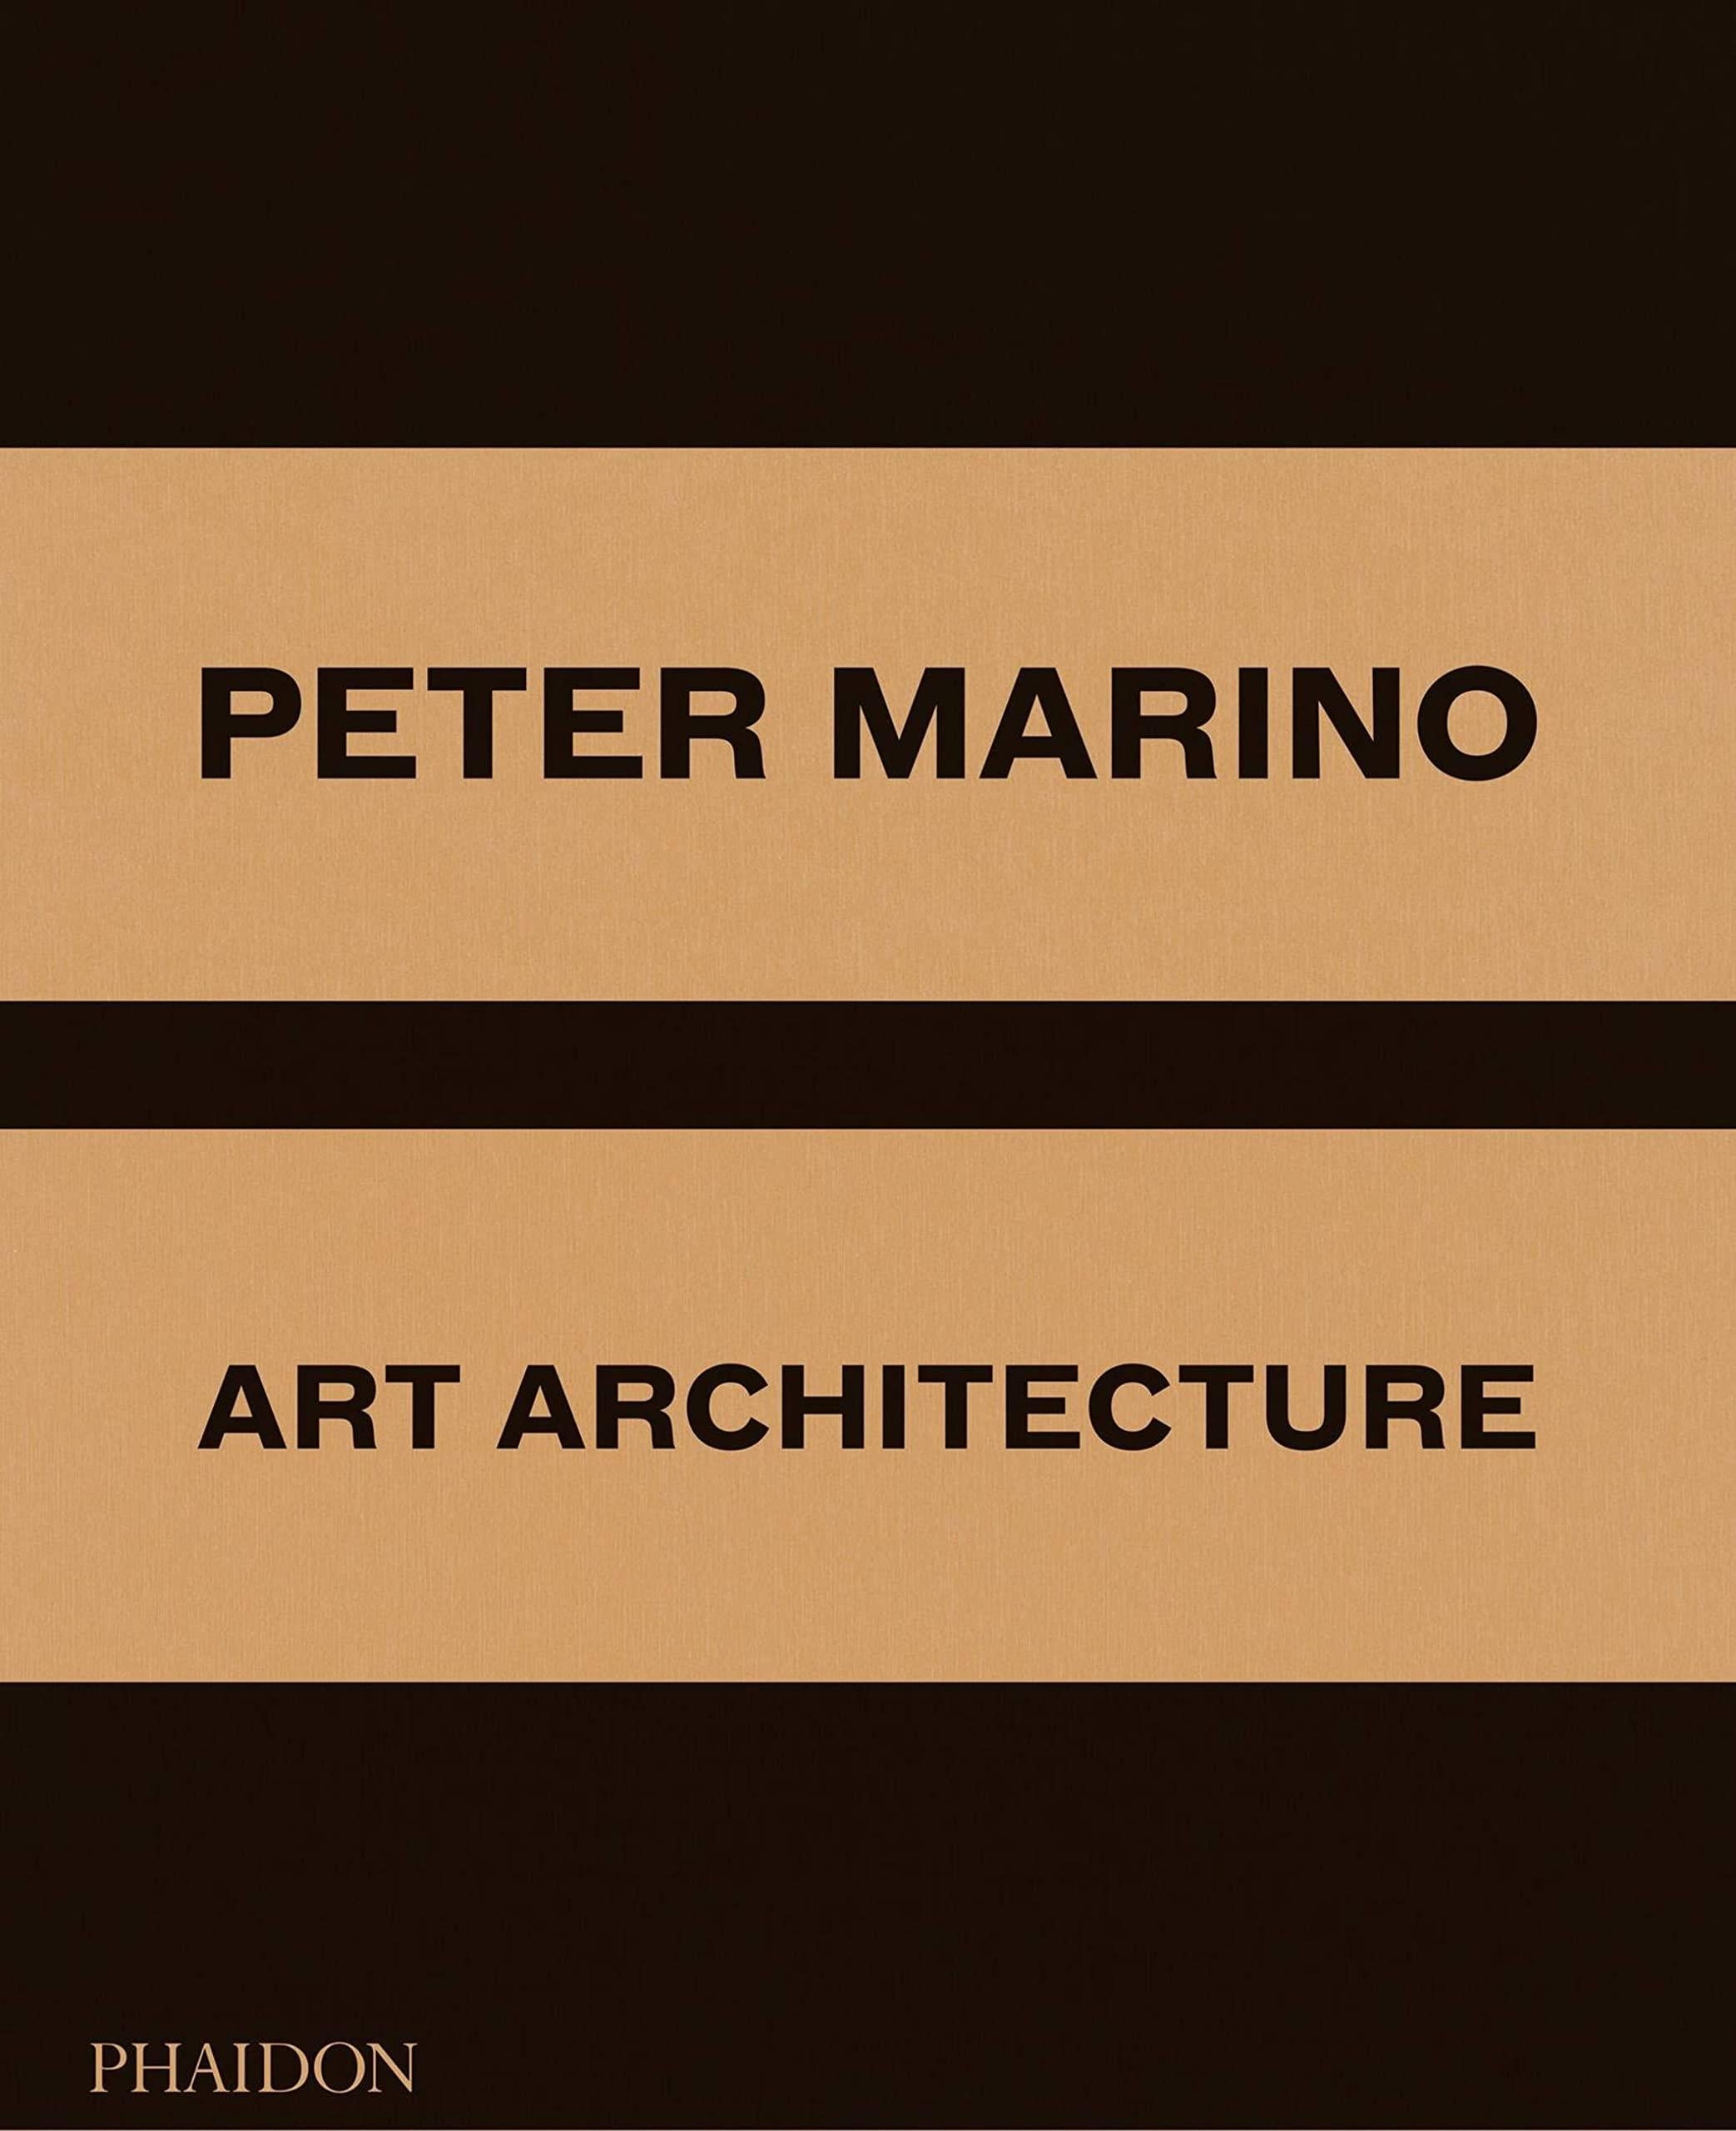 American In Stock in Los Angeles, Peter Marino Art Architecture, Luxury Edition